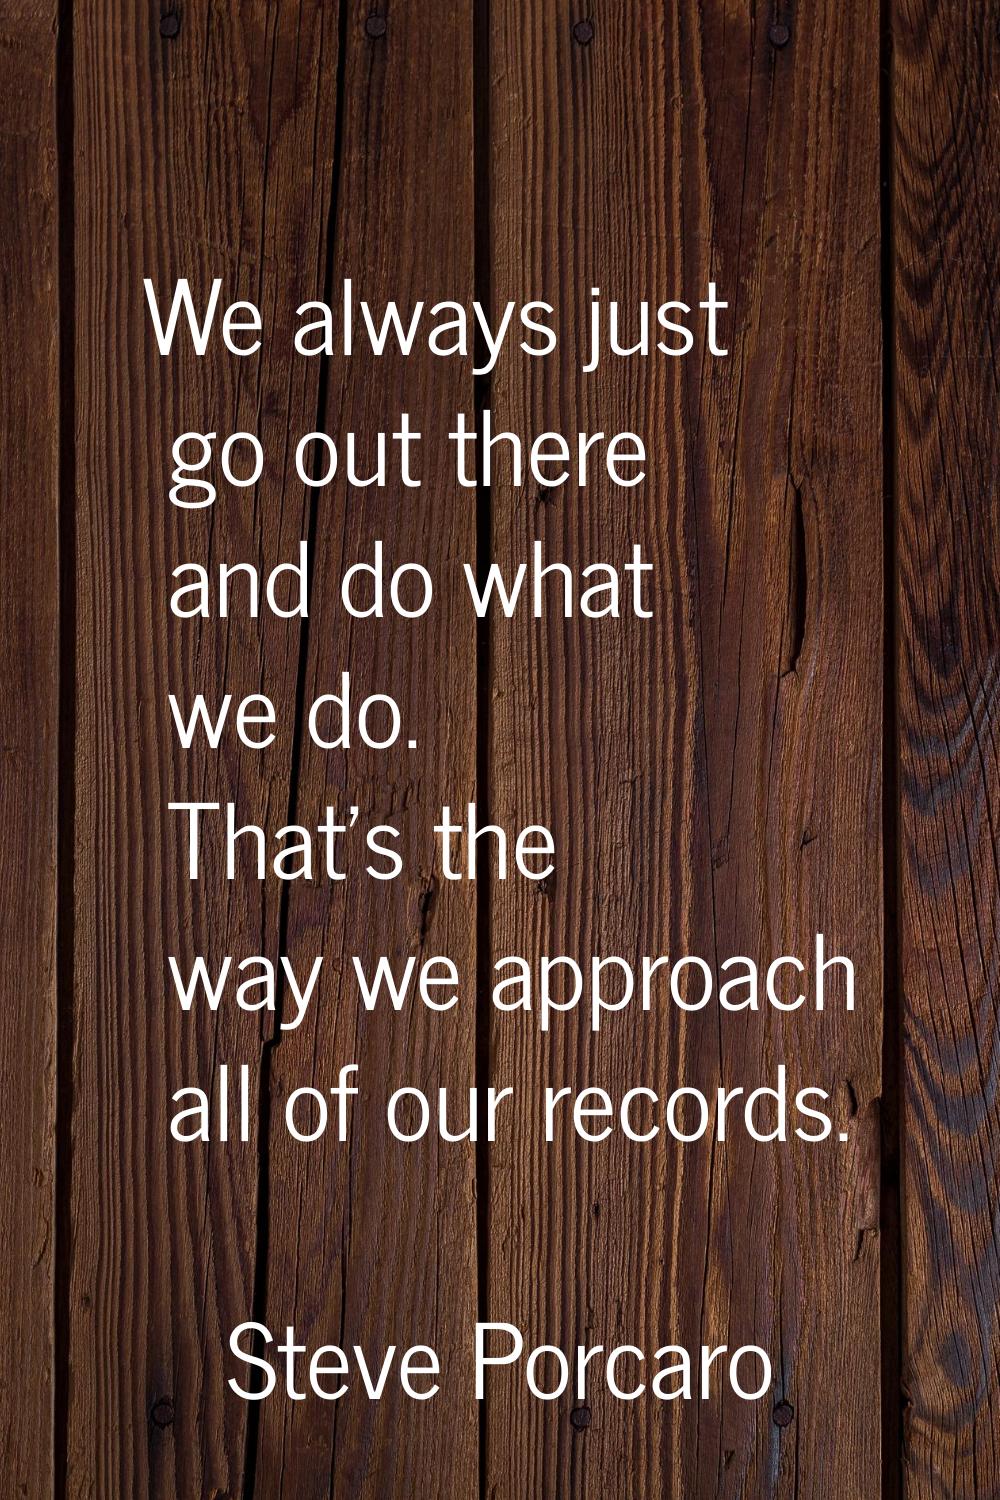 We always just go out there and do what we do. That's the way we approach all of our records.